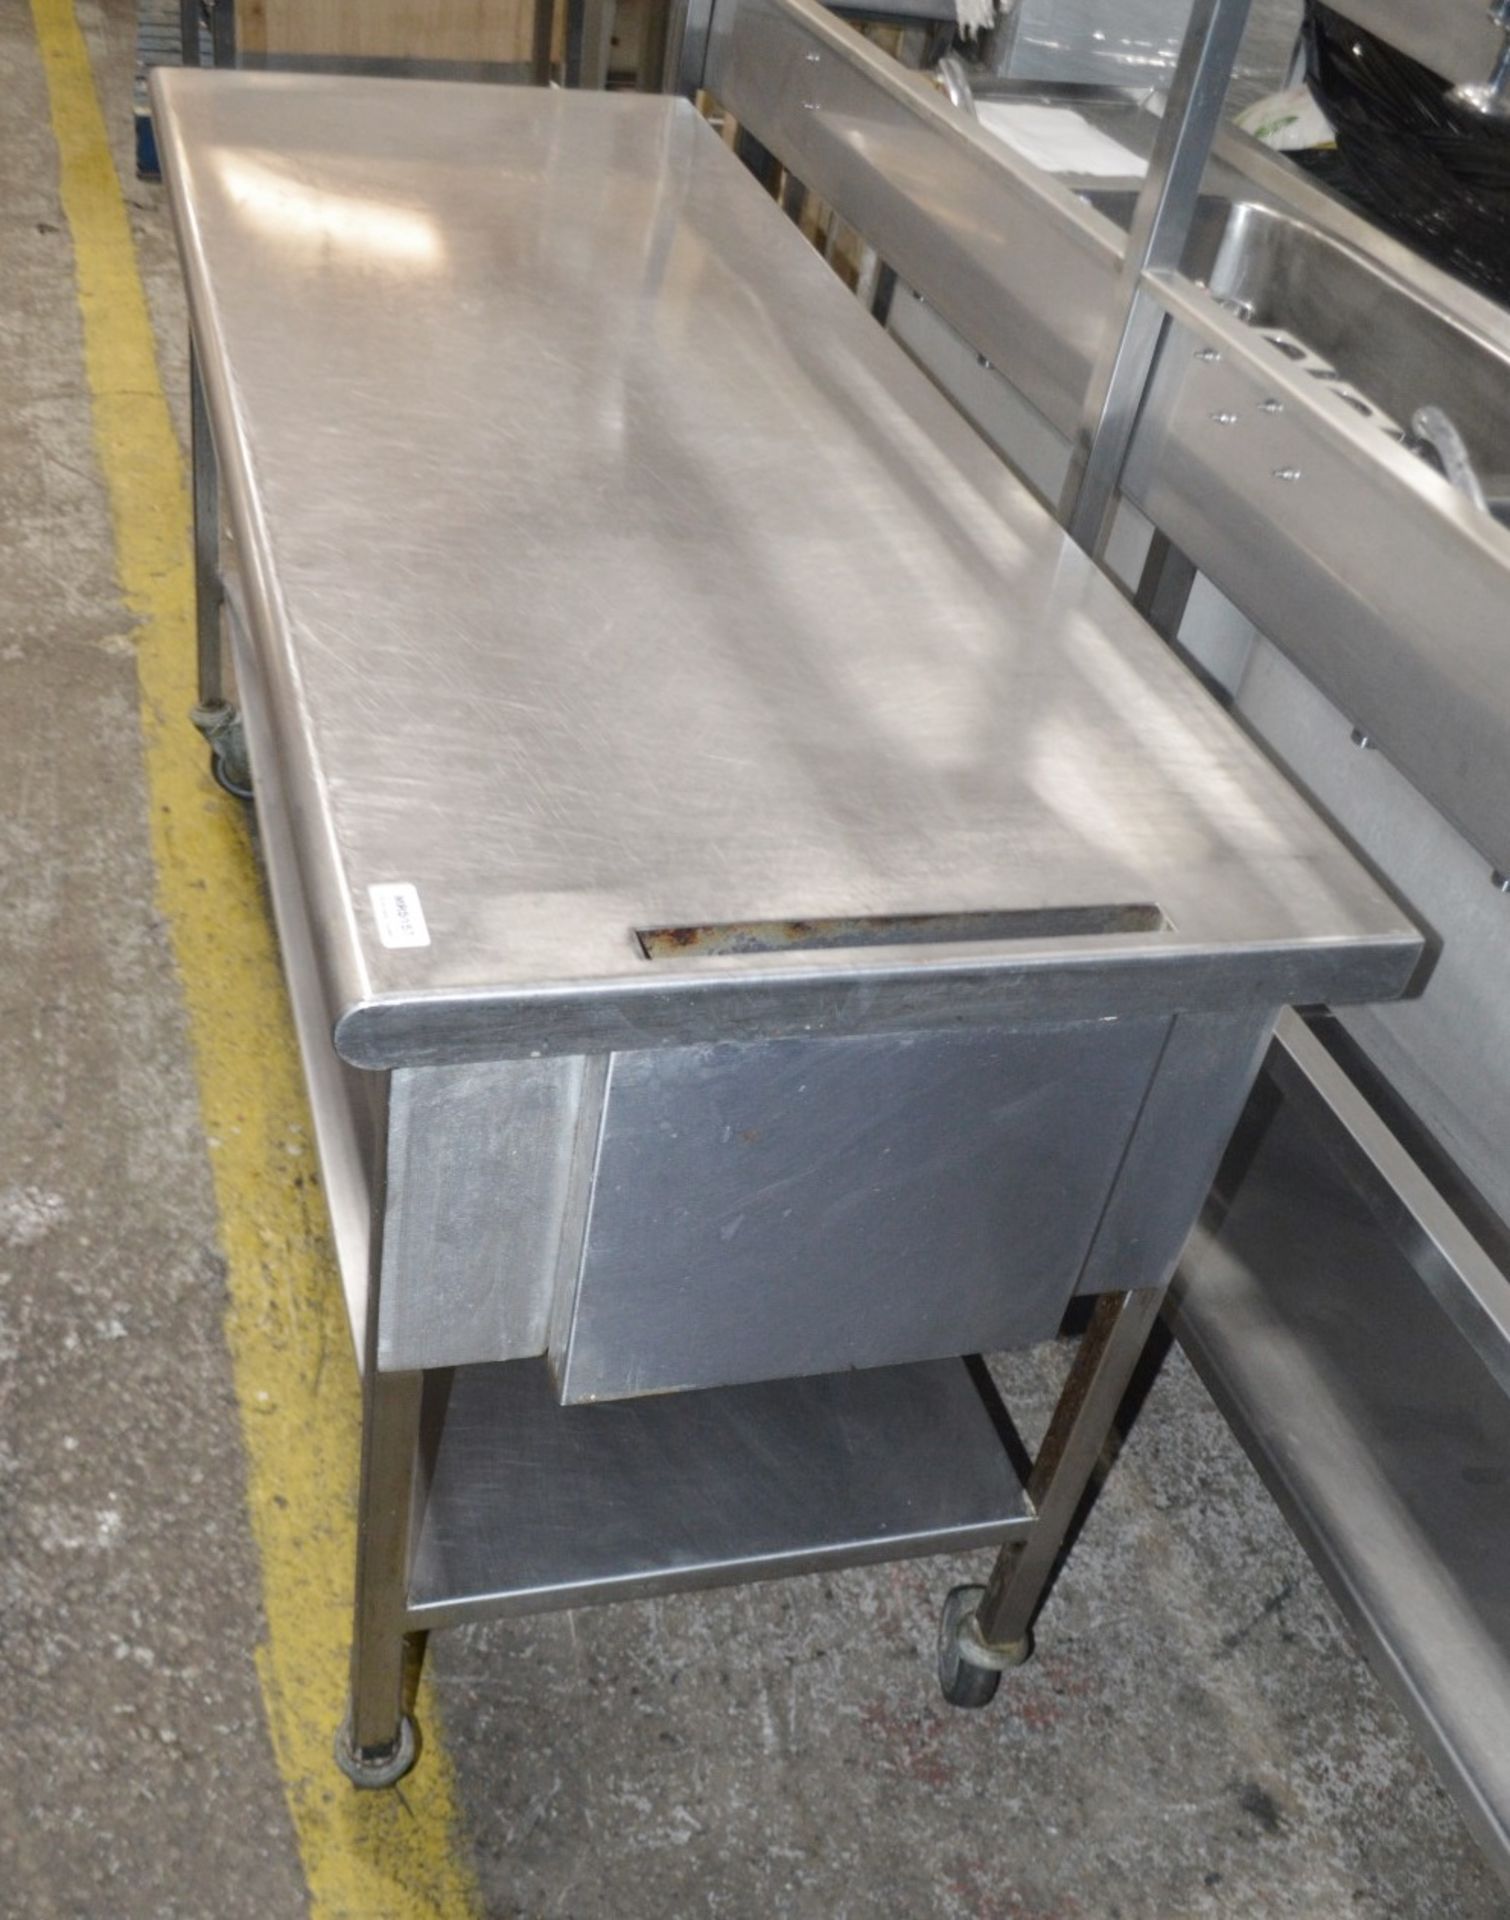 1 x Stainless Steel Commercial Kitchen Long Prep Table On Castors - Dimensions: H89 x W160 x D60cm - - Image 3 of 3